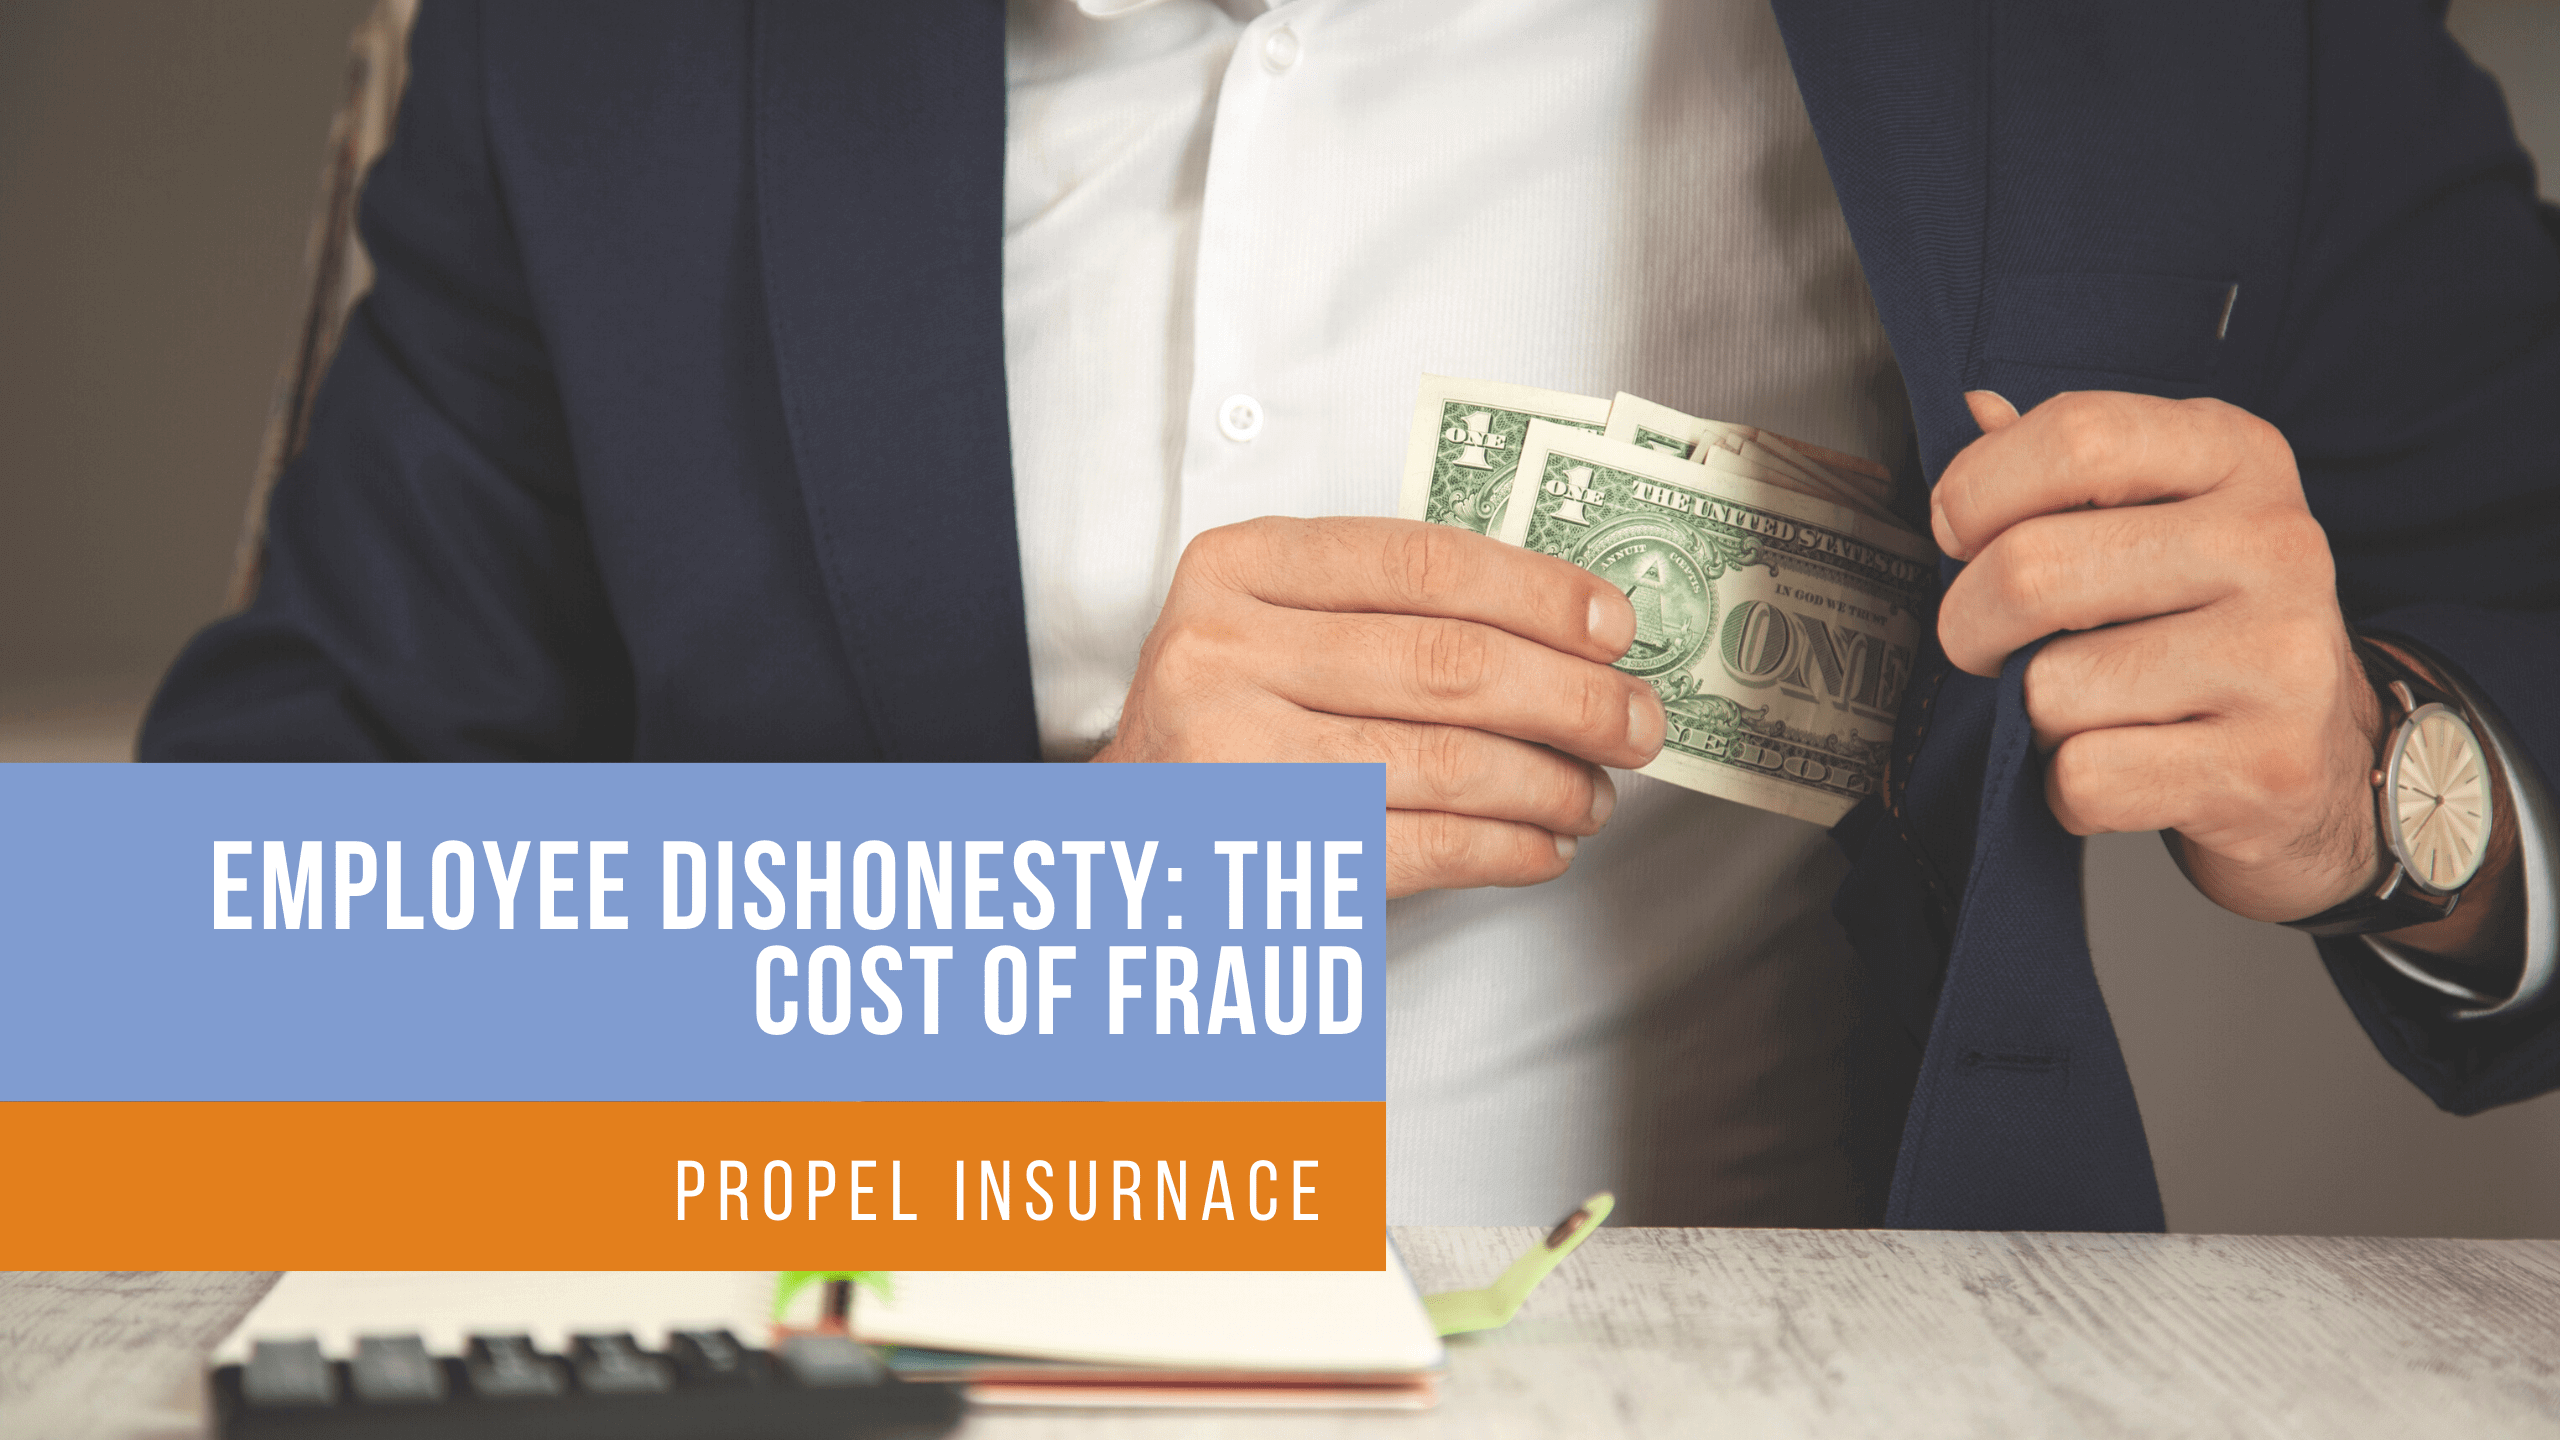 employee dishonesty: The cost of fraud